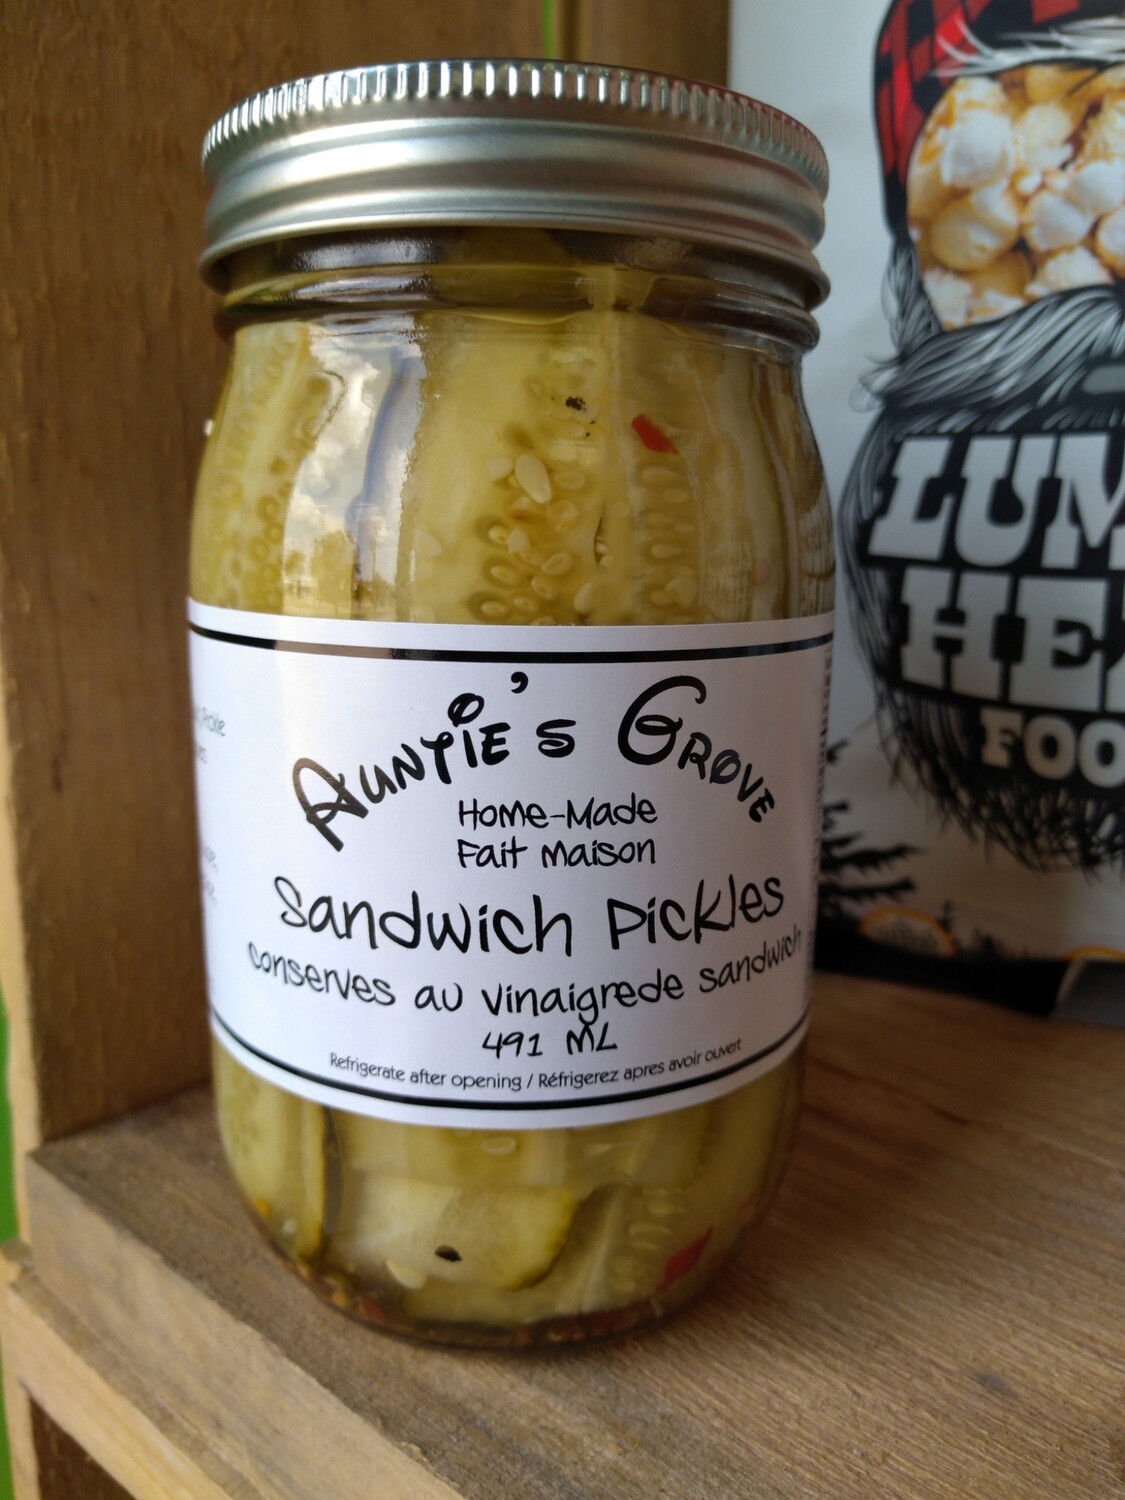 Auntie's Groves Sandwich Pickles - Local